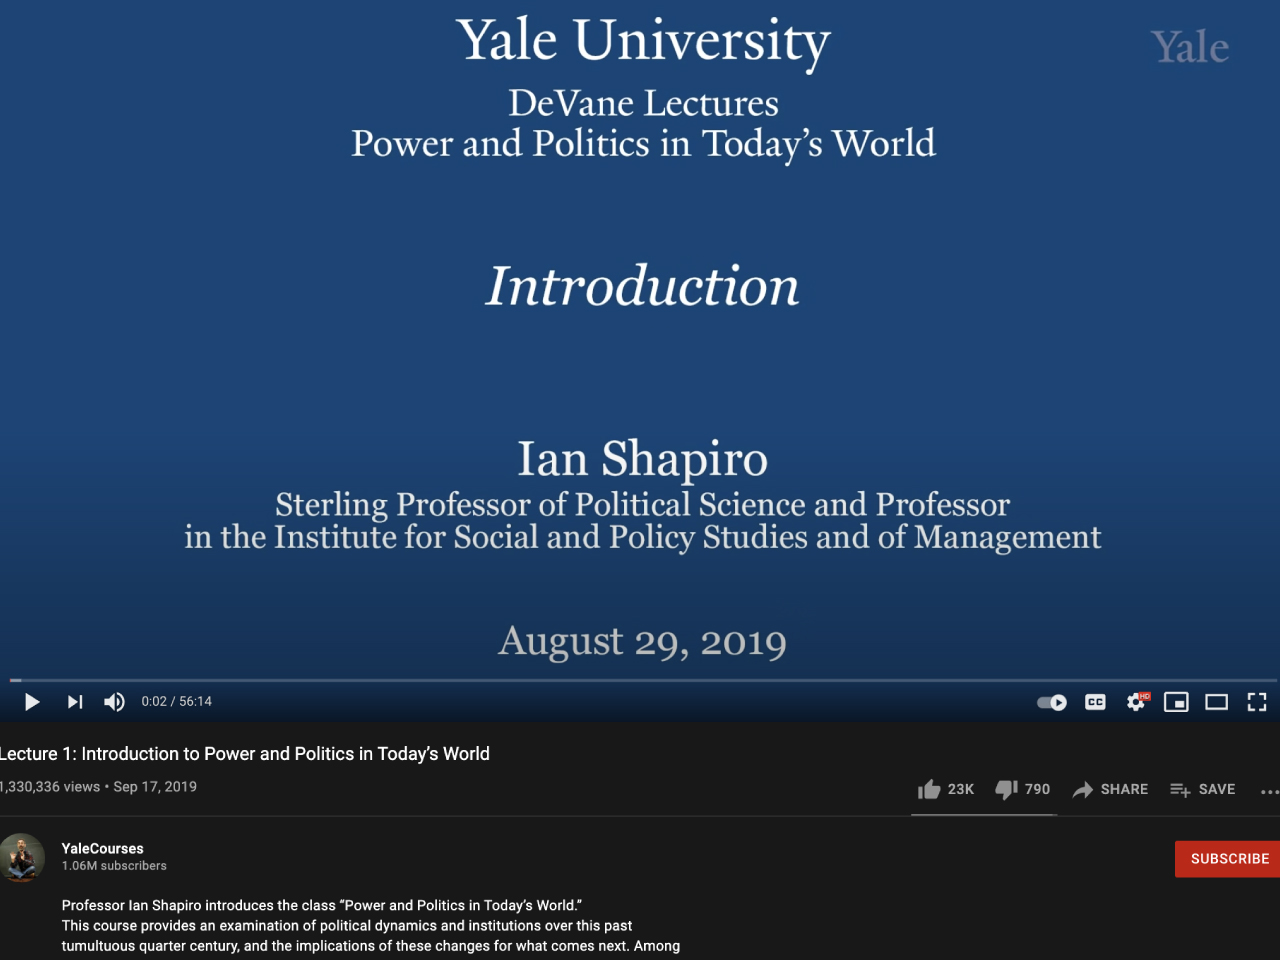 Lecture 1: Introduction to Power and Politics in Today’s World